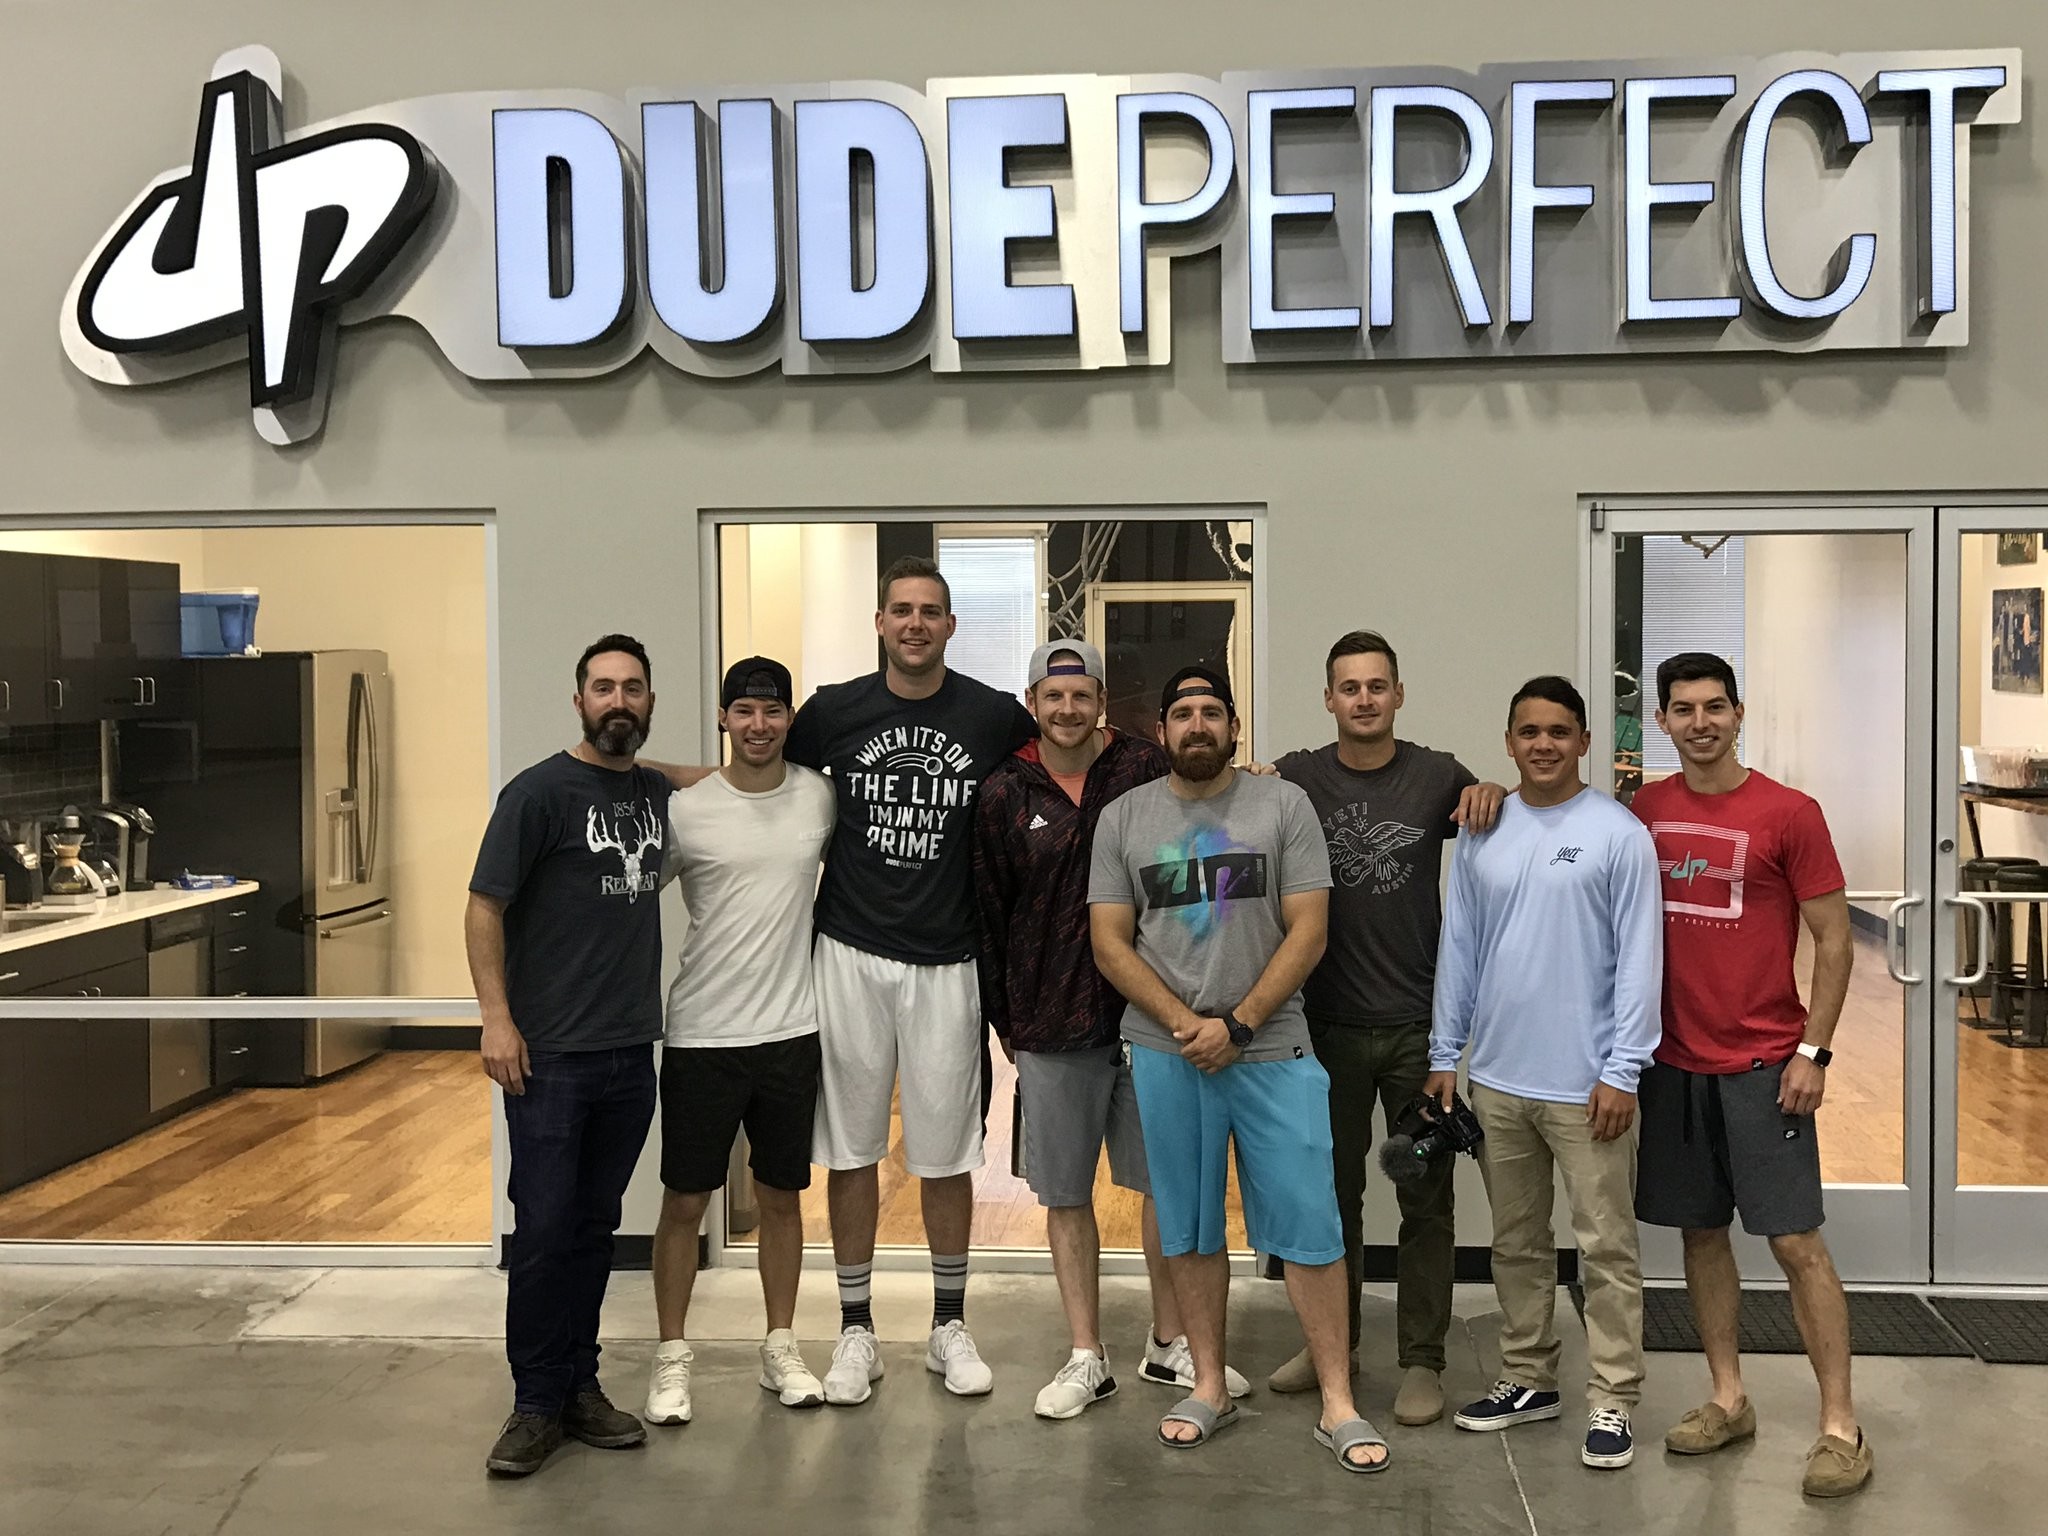 2048x1536 Dude Perfect on Twitter: "Great time today with @BadFishTv! Thanks for  swing by fellas! https://t.co/NQYQPvZmVu"